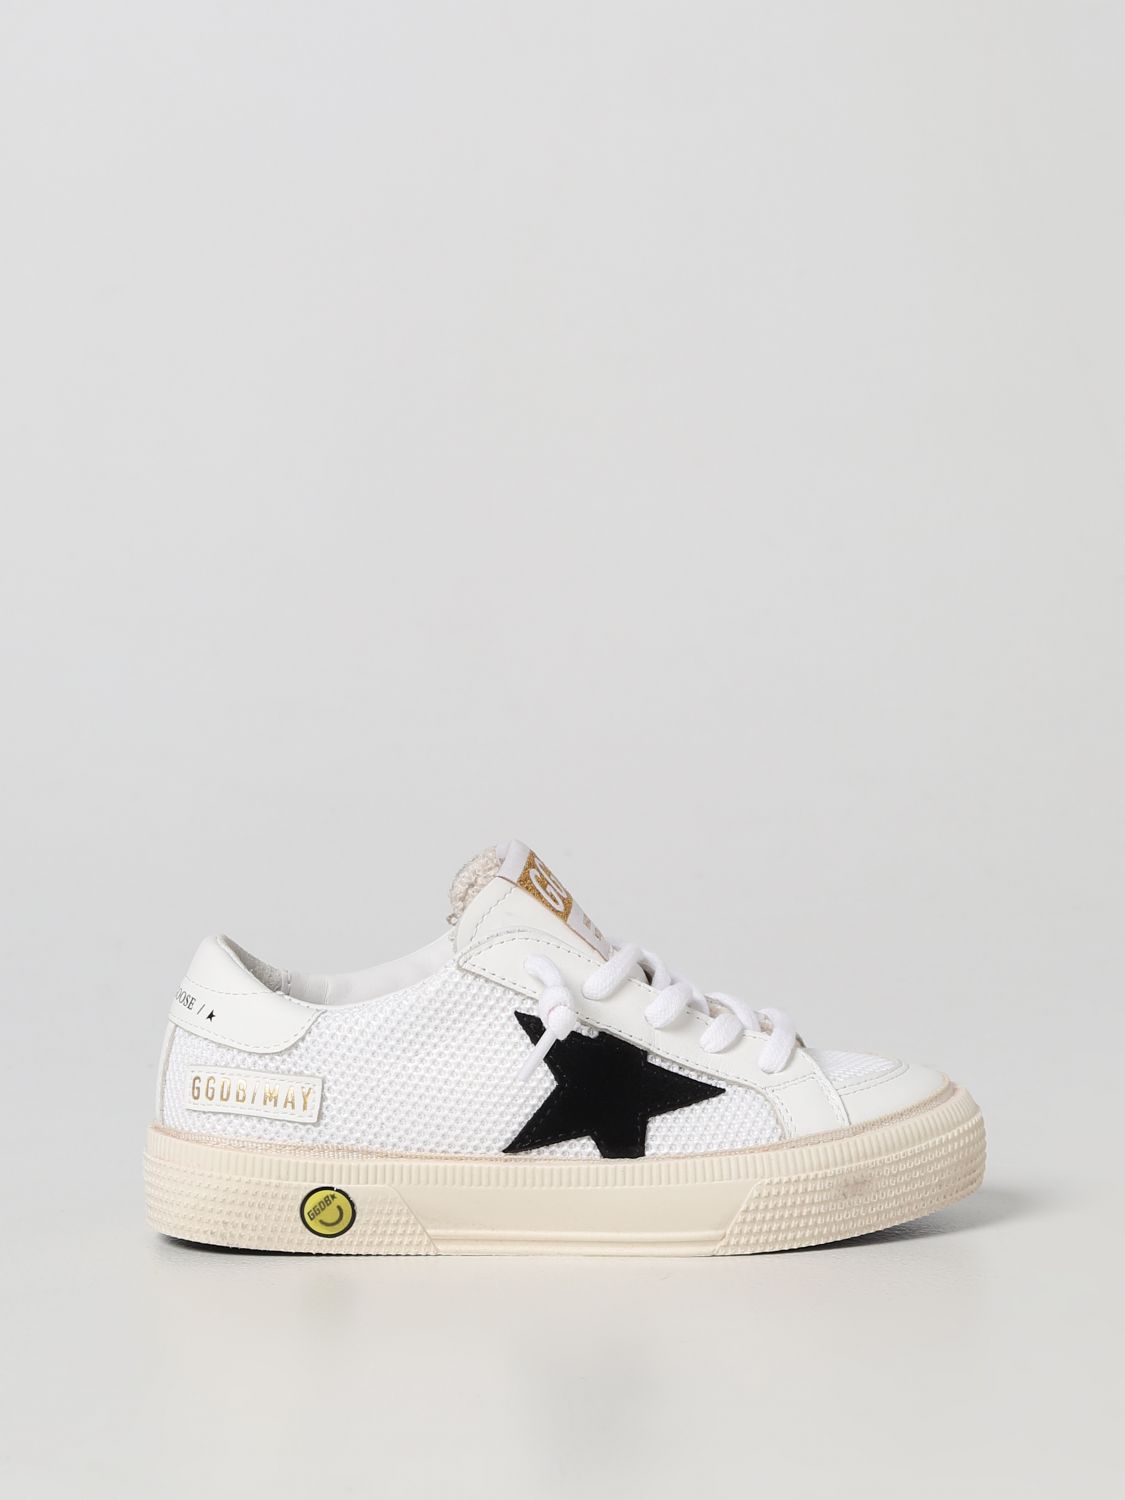 Sneakers May Golden Goose in pelle e tessuto